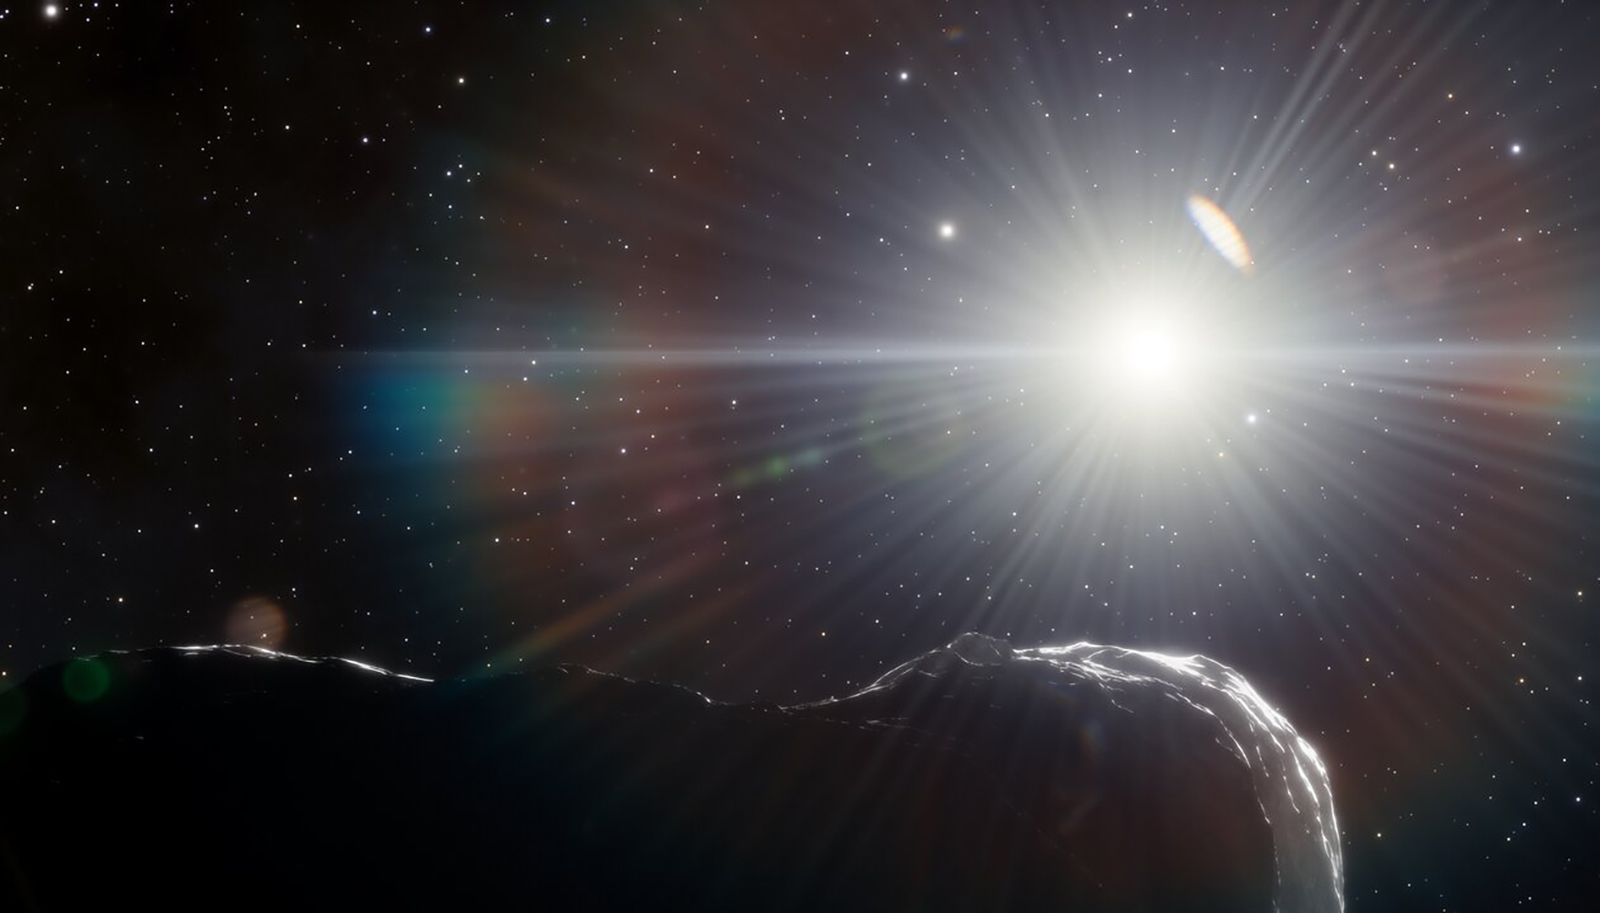 Three Potentially Dangerous Asteroids Detected